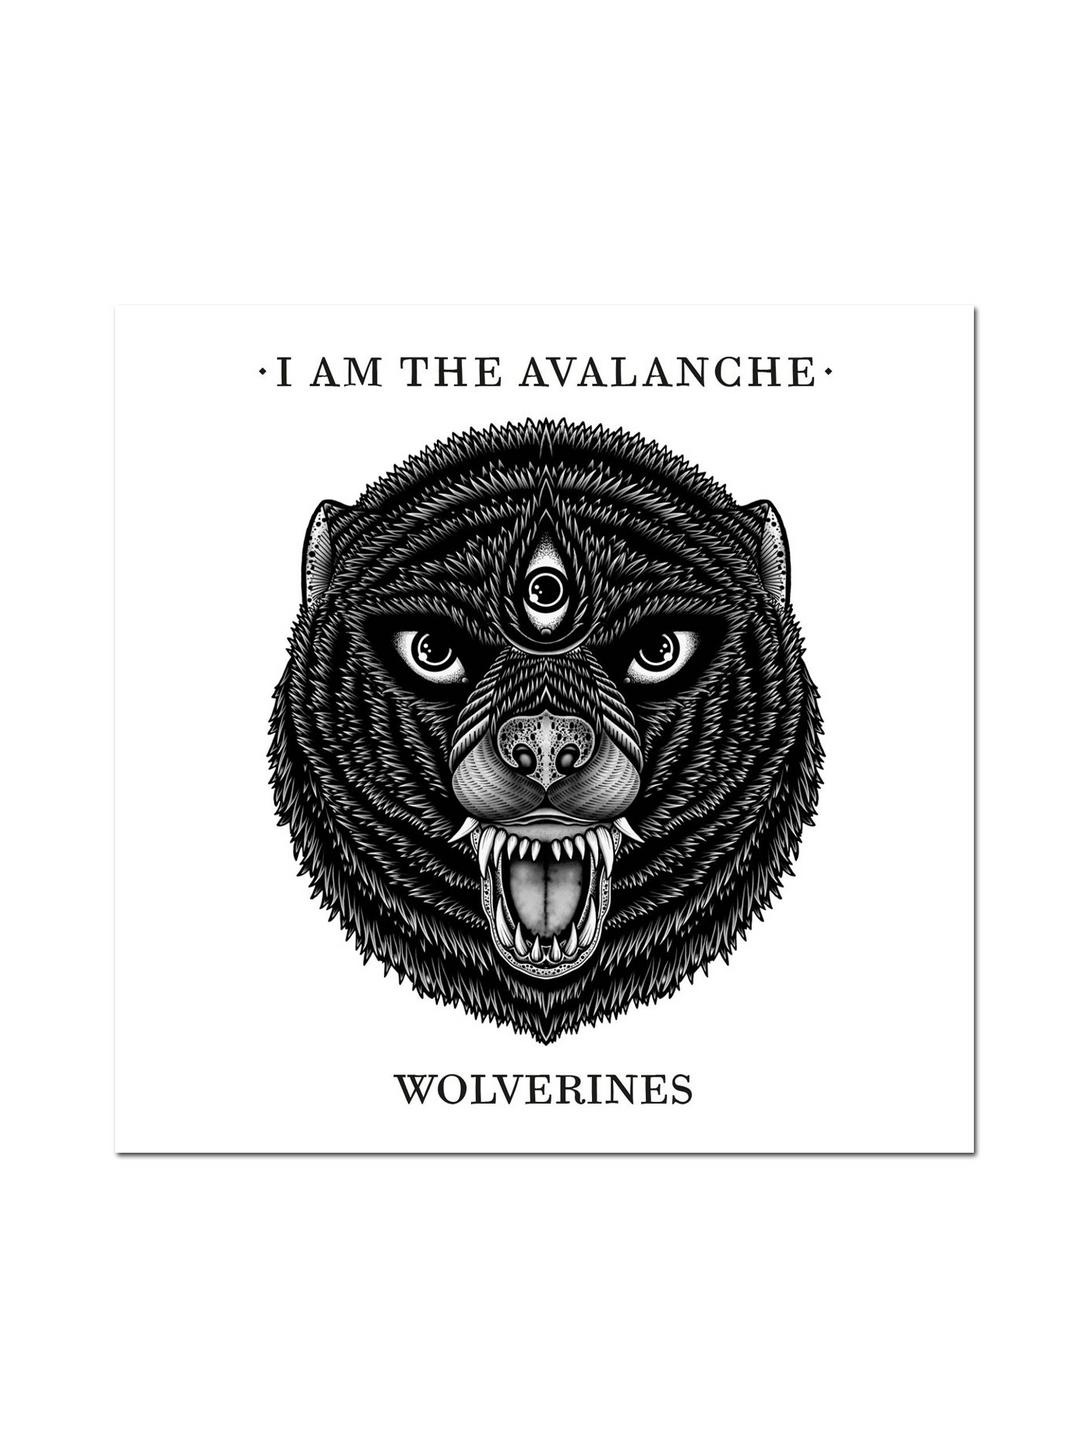 I Am The Avalanche - Wolverines Vinyl LP Hot Topic Exclusive, , hi-res